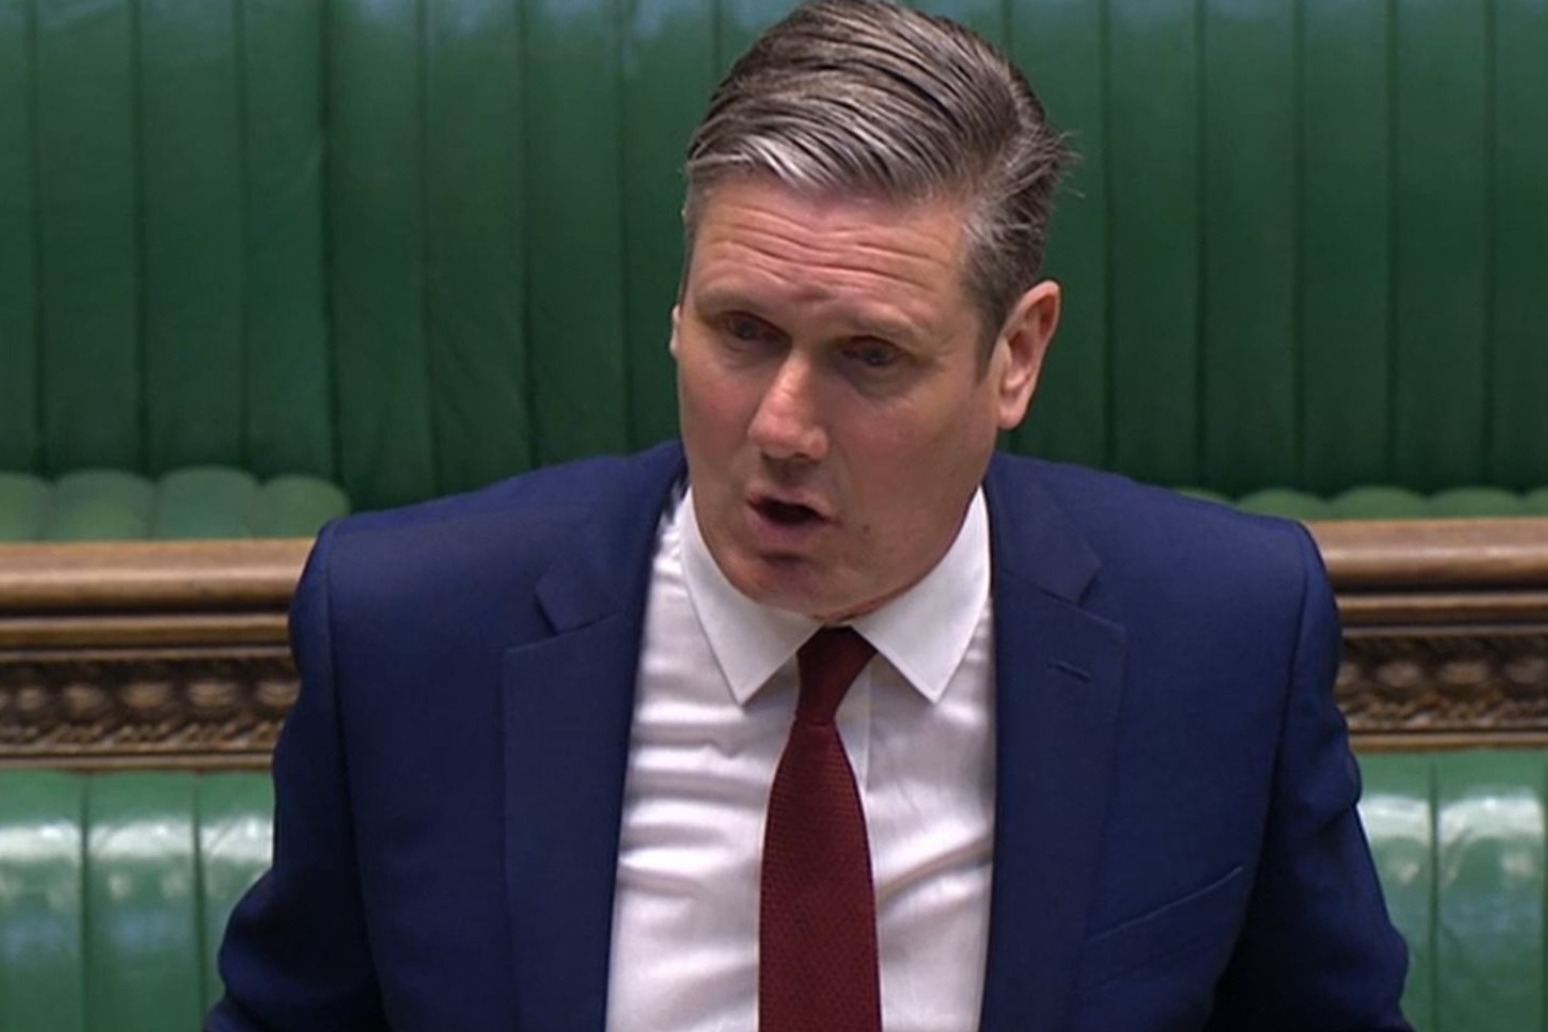 Starmer accuses Johnson of not addressing security concerns 